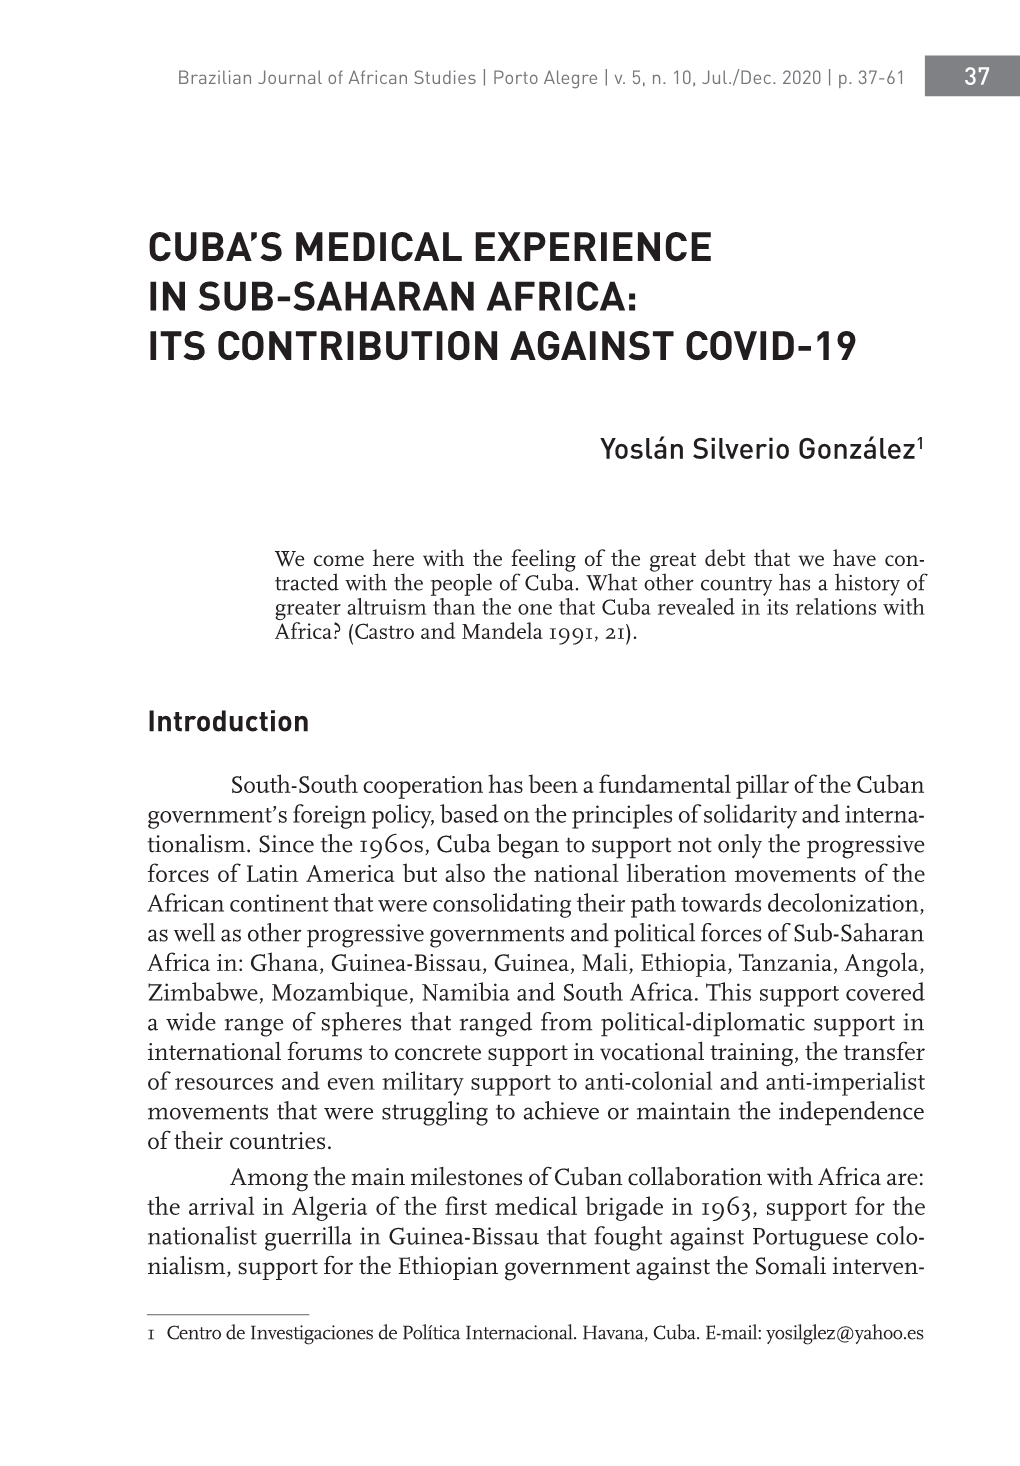 Cuba's Medical Experience in Sub-Saharan Africa: Its Contribution Against Covid-19